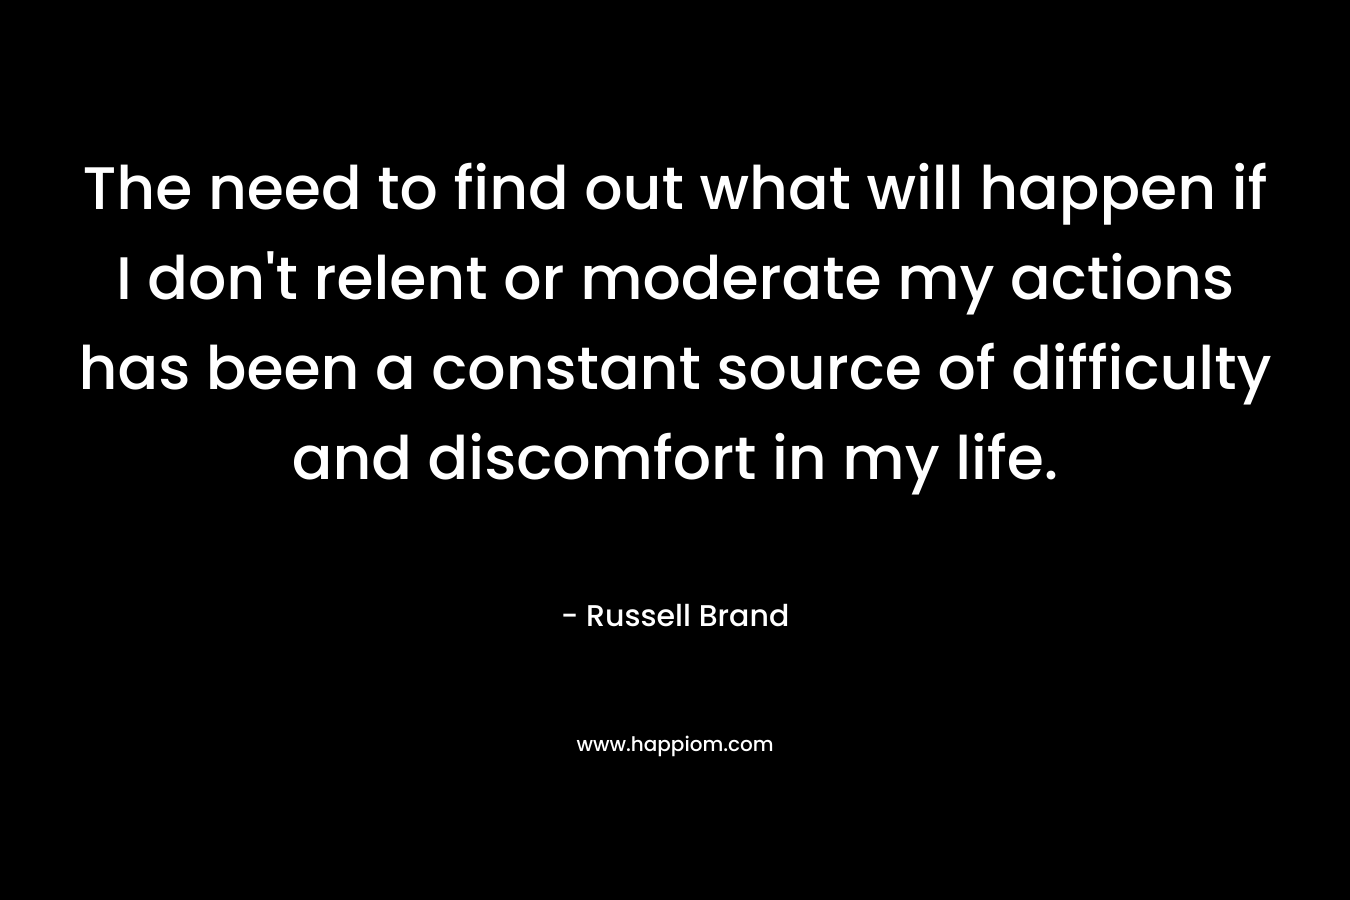 The need to find out what will happen if I don’t relent or moderate my actions has been a constant source of difficulty and discomfort in my life. – Russell Brand